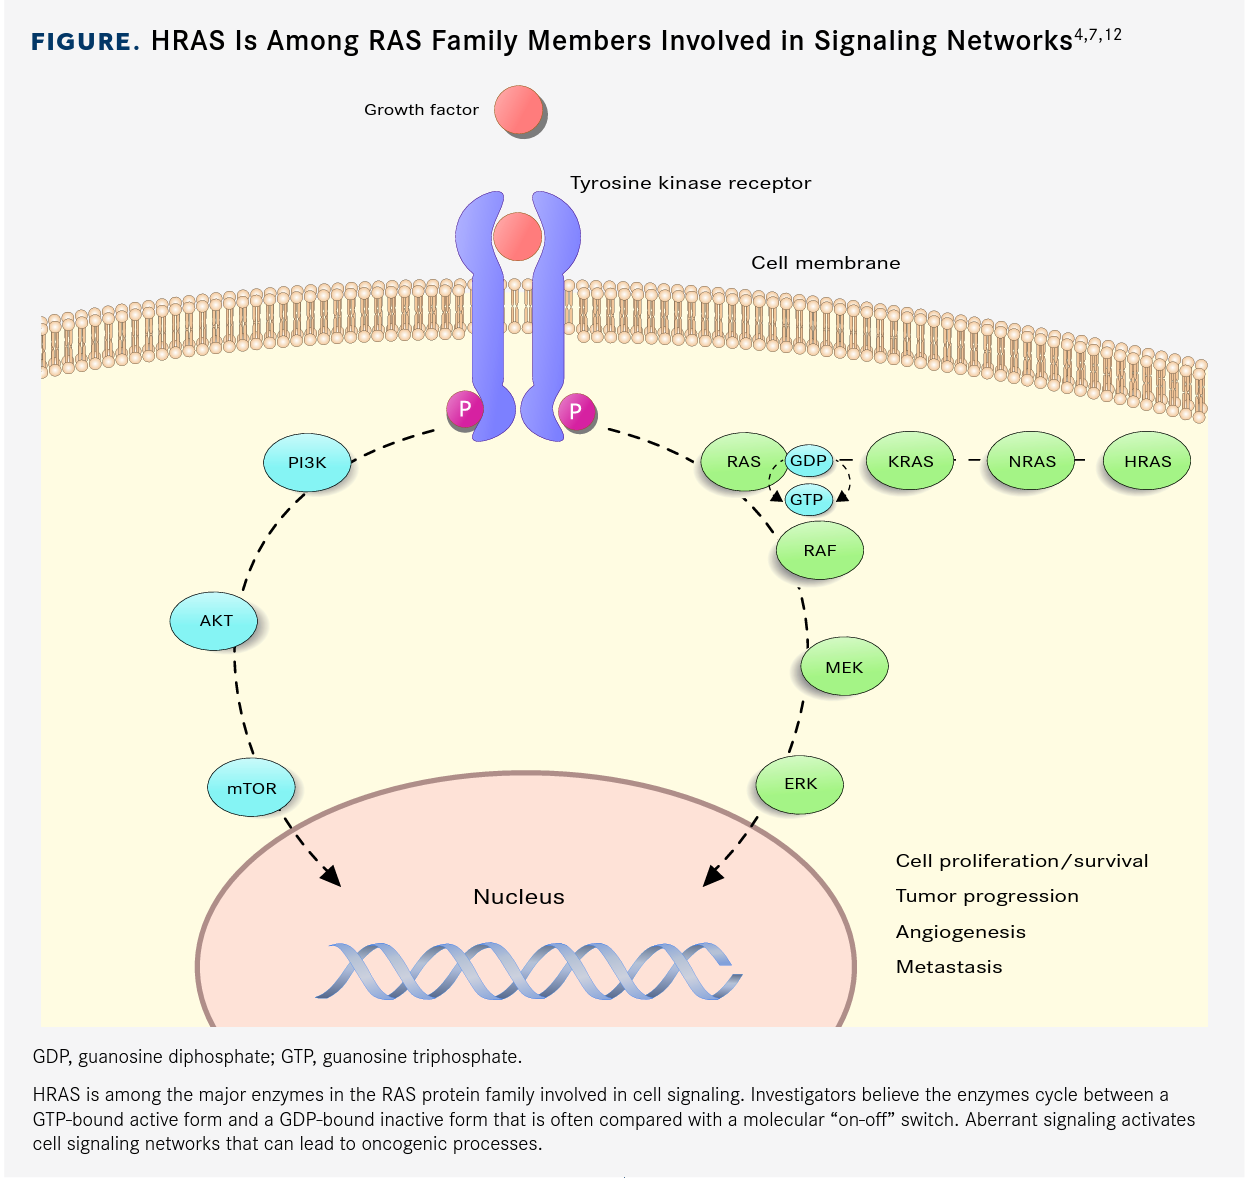 HRAS Is Among RAS Family Members Involved in Signaling Networks